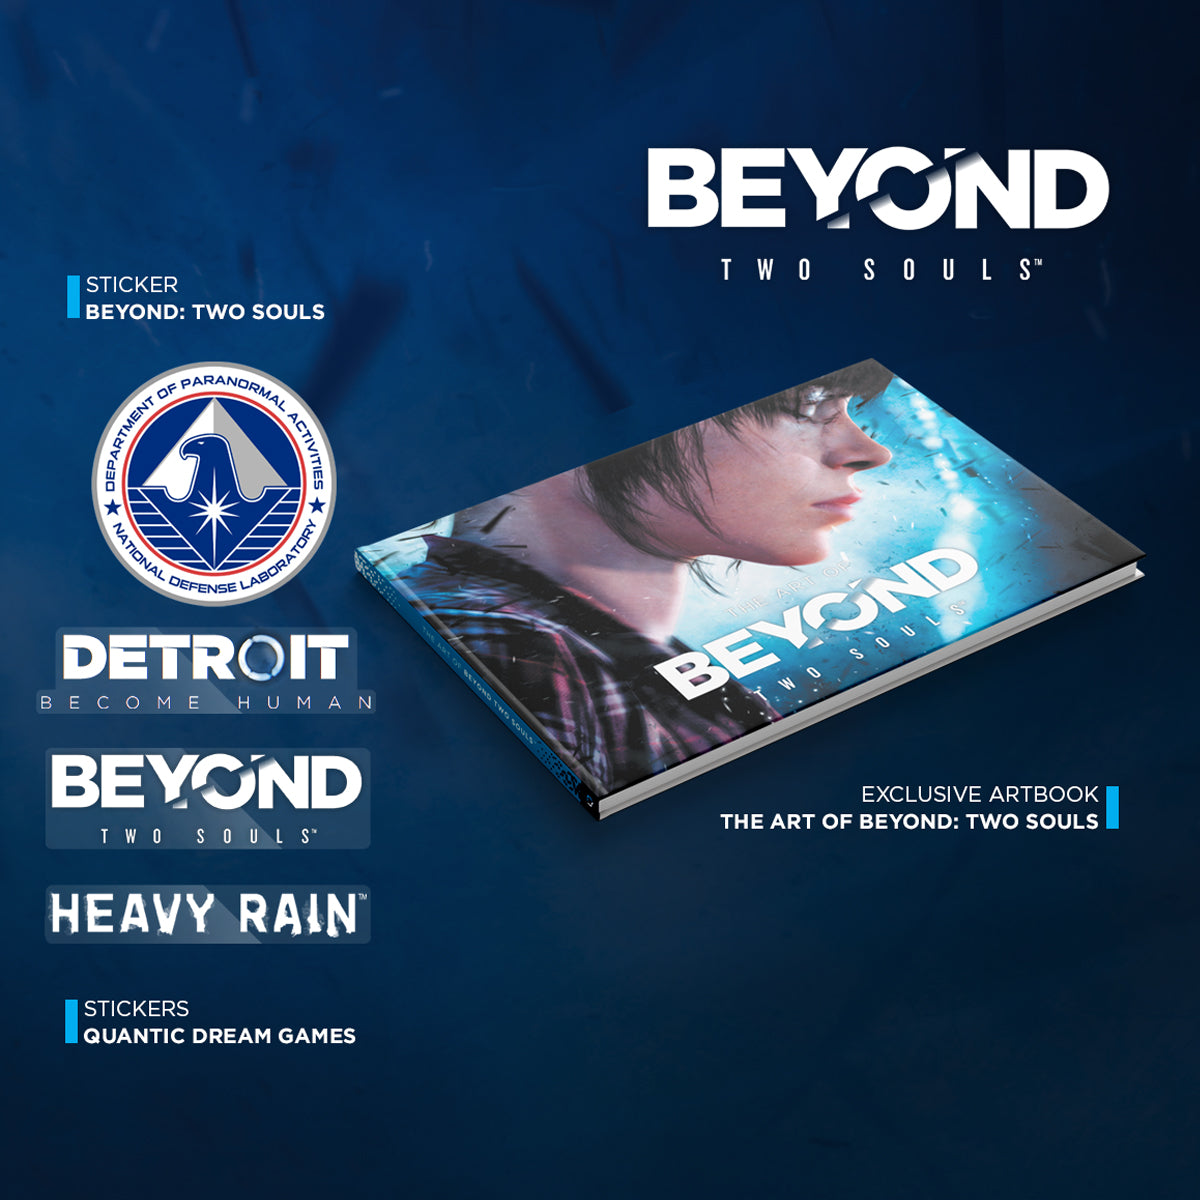 Beyond Two Souls  Download and Buy Today - Epic Games Store